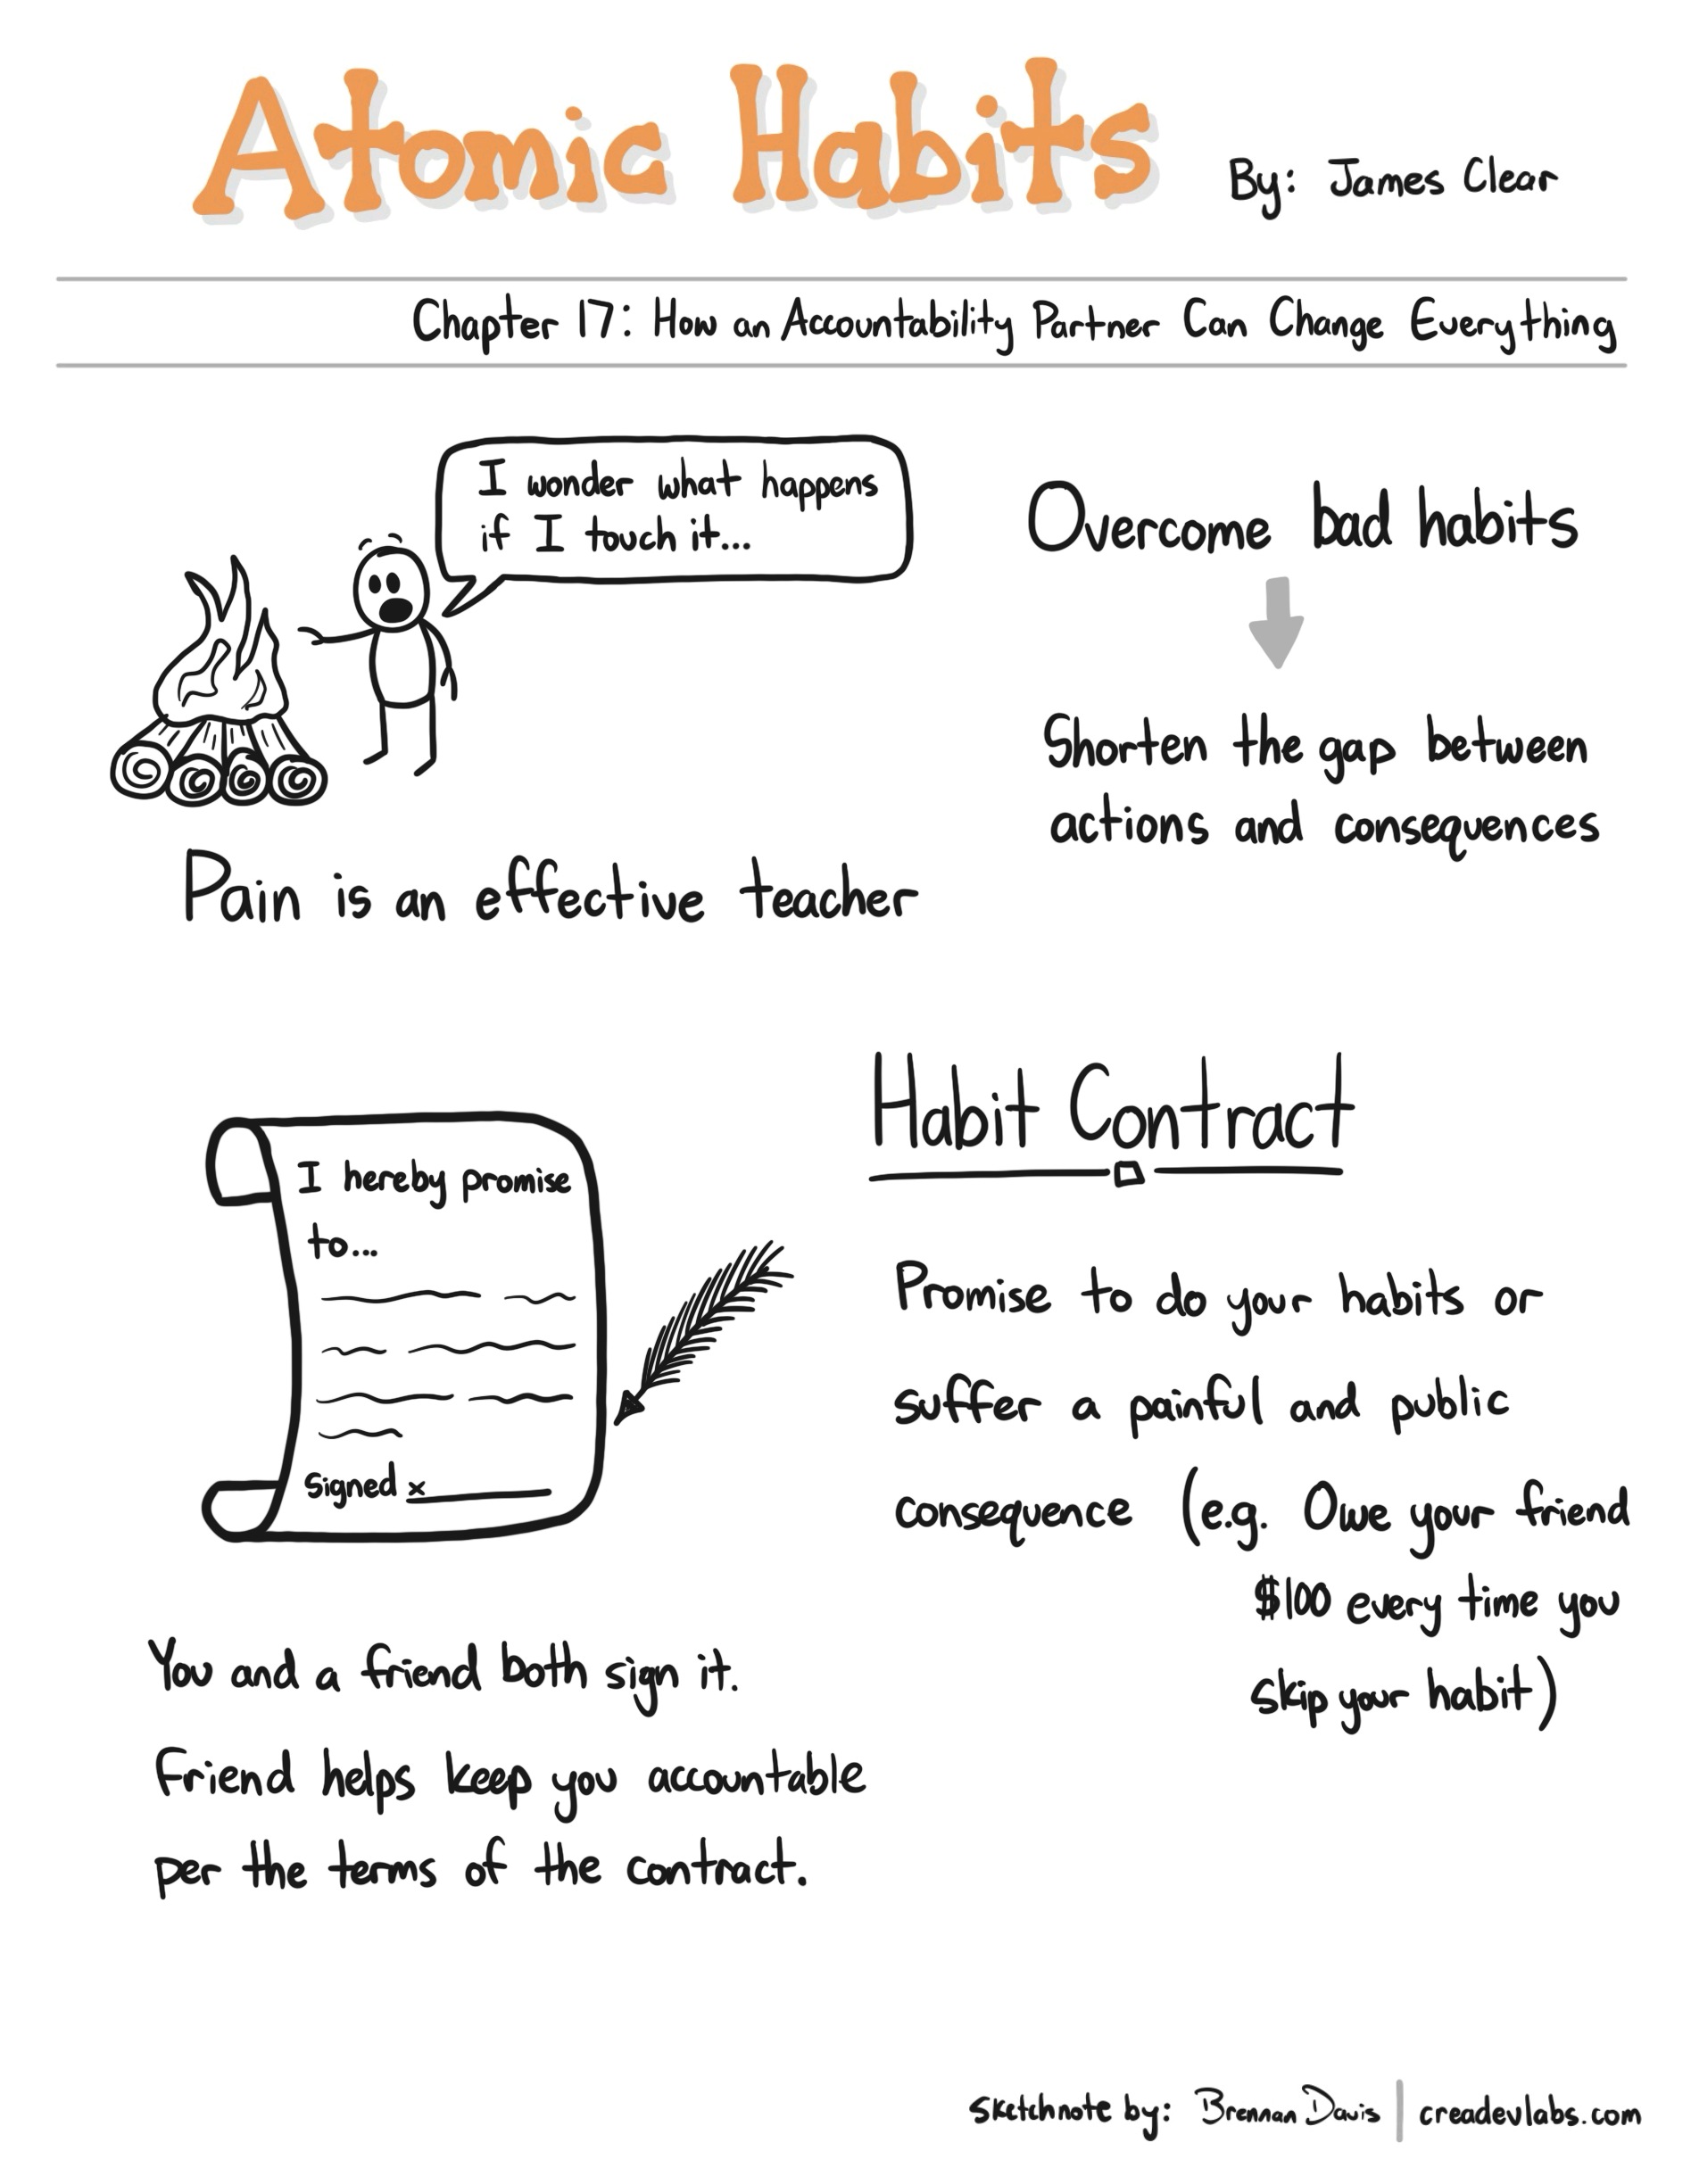 Summary of Atomic Habits: How an Accountability Partner Can Change Everything